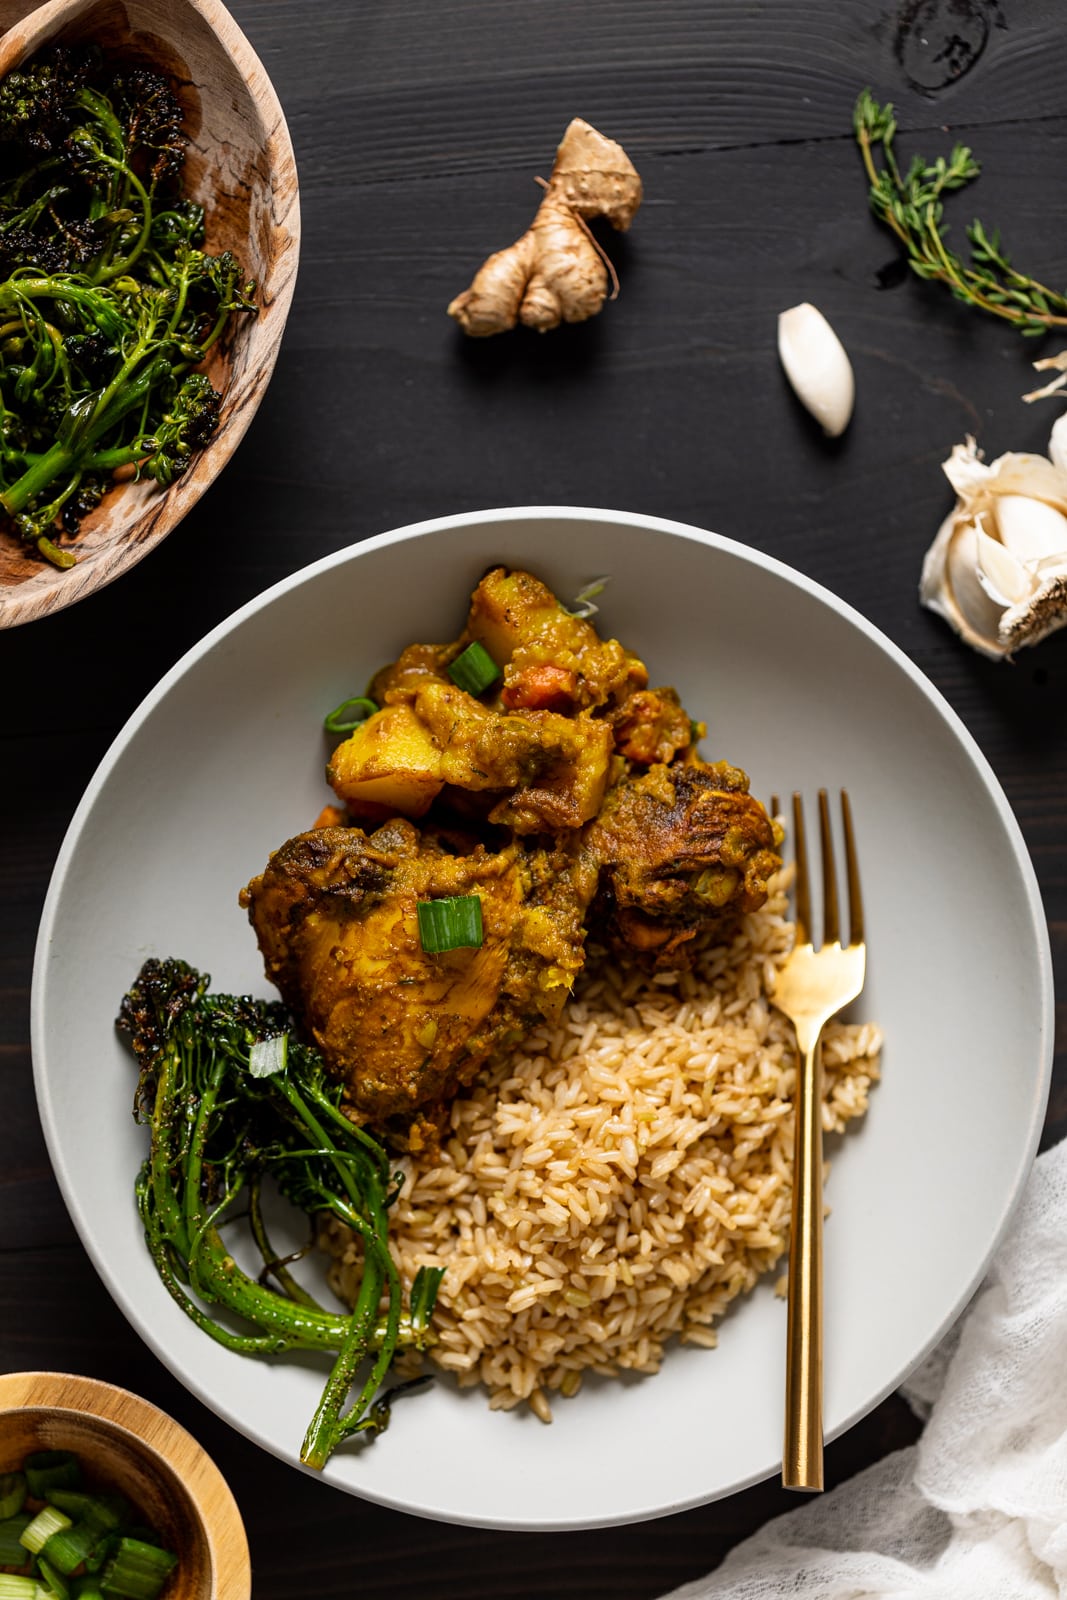 Plate of Jamaican Curry Chicken, rice, and broccolini